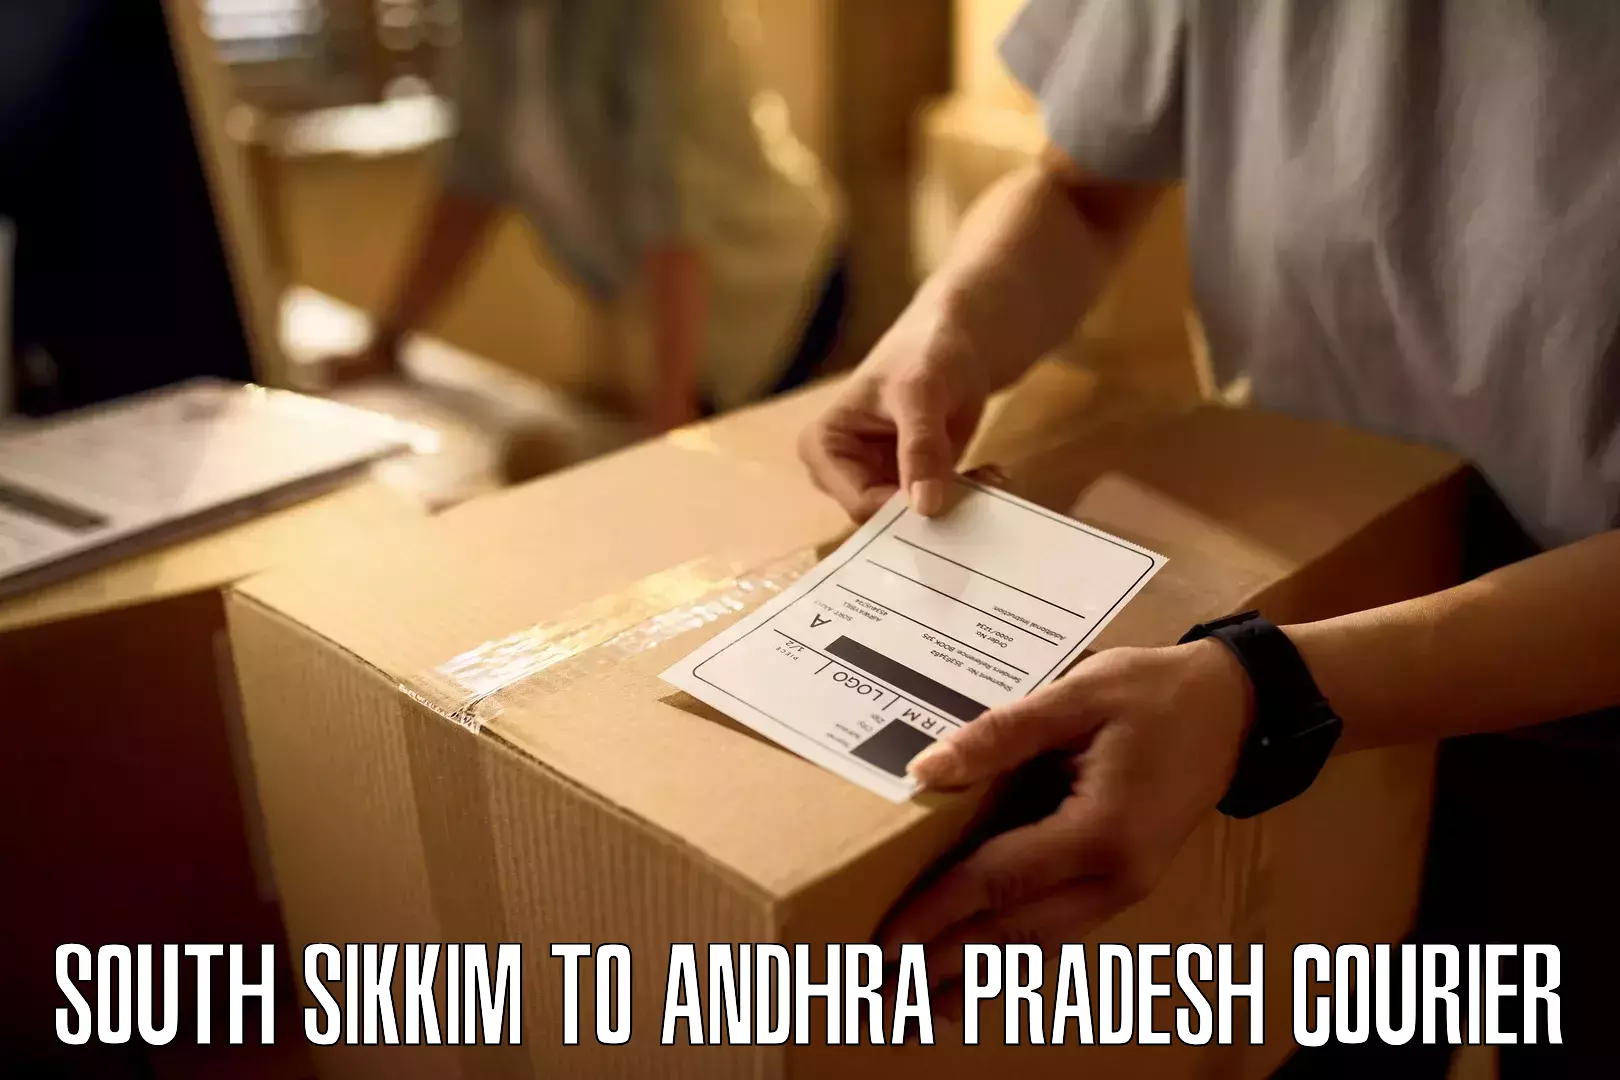 Customer-focused courier South Sikkim to Andhra Pradesh